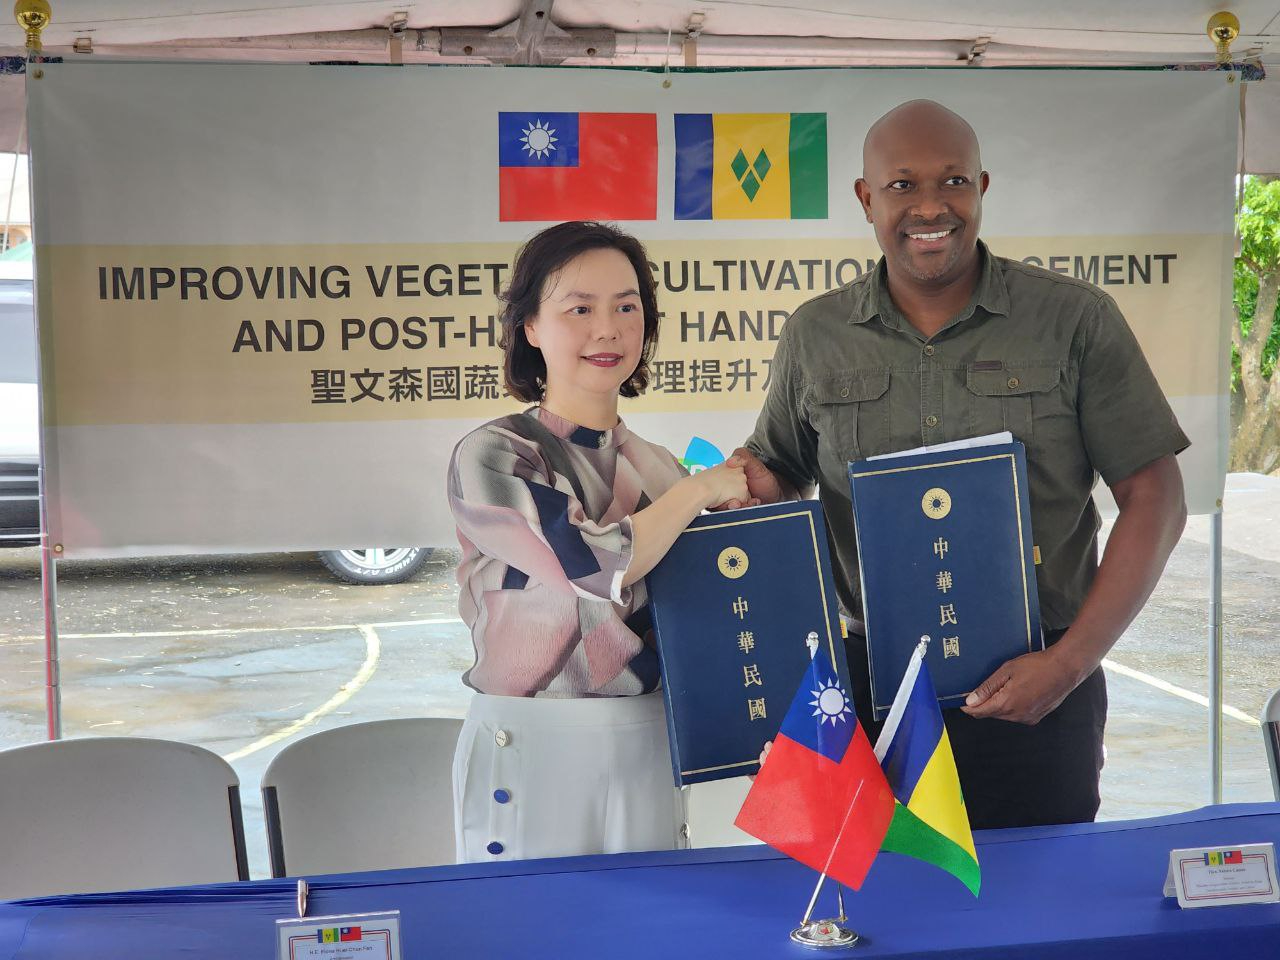 Amb. Fiona Huei-Chun Fan and Hon. Saboto Caesar, Minister of Agriculture, Forestry, Fisheries, Rural Transformation, Industry and Labour, on behalf of the government of the Republic of China (Taiwan) and the government of Saint Vincent and the Grenadines, signed the Implementing Arrangements of the ”Improving Vegetable Cultivation Management and Post-harvest Handling Project” and “Improving Livestock Rearing Project” at the New Ground Primary School, North Union on 25th August, 2023, officially launching the projects.